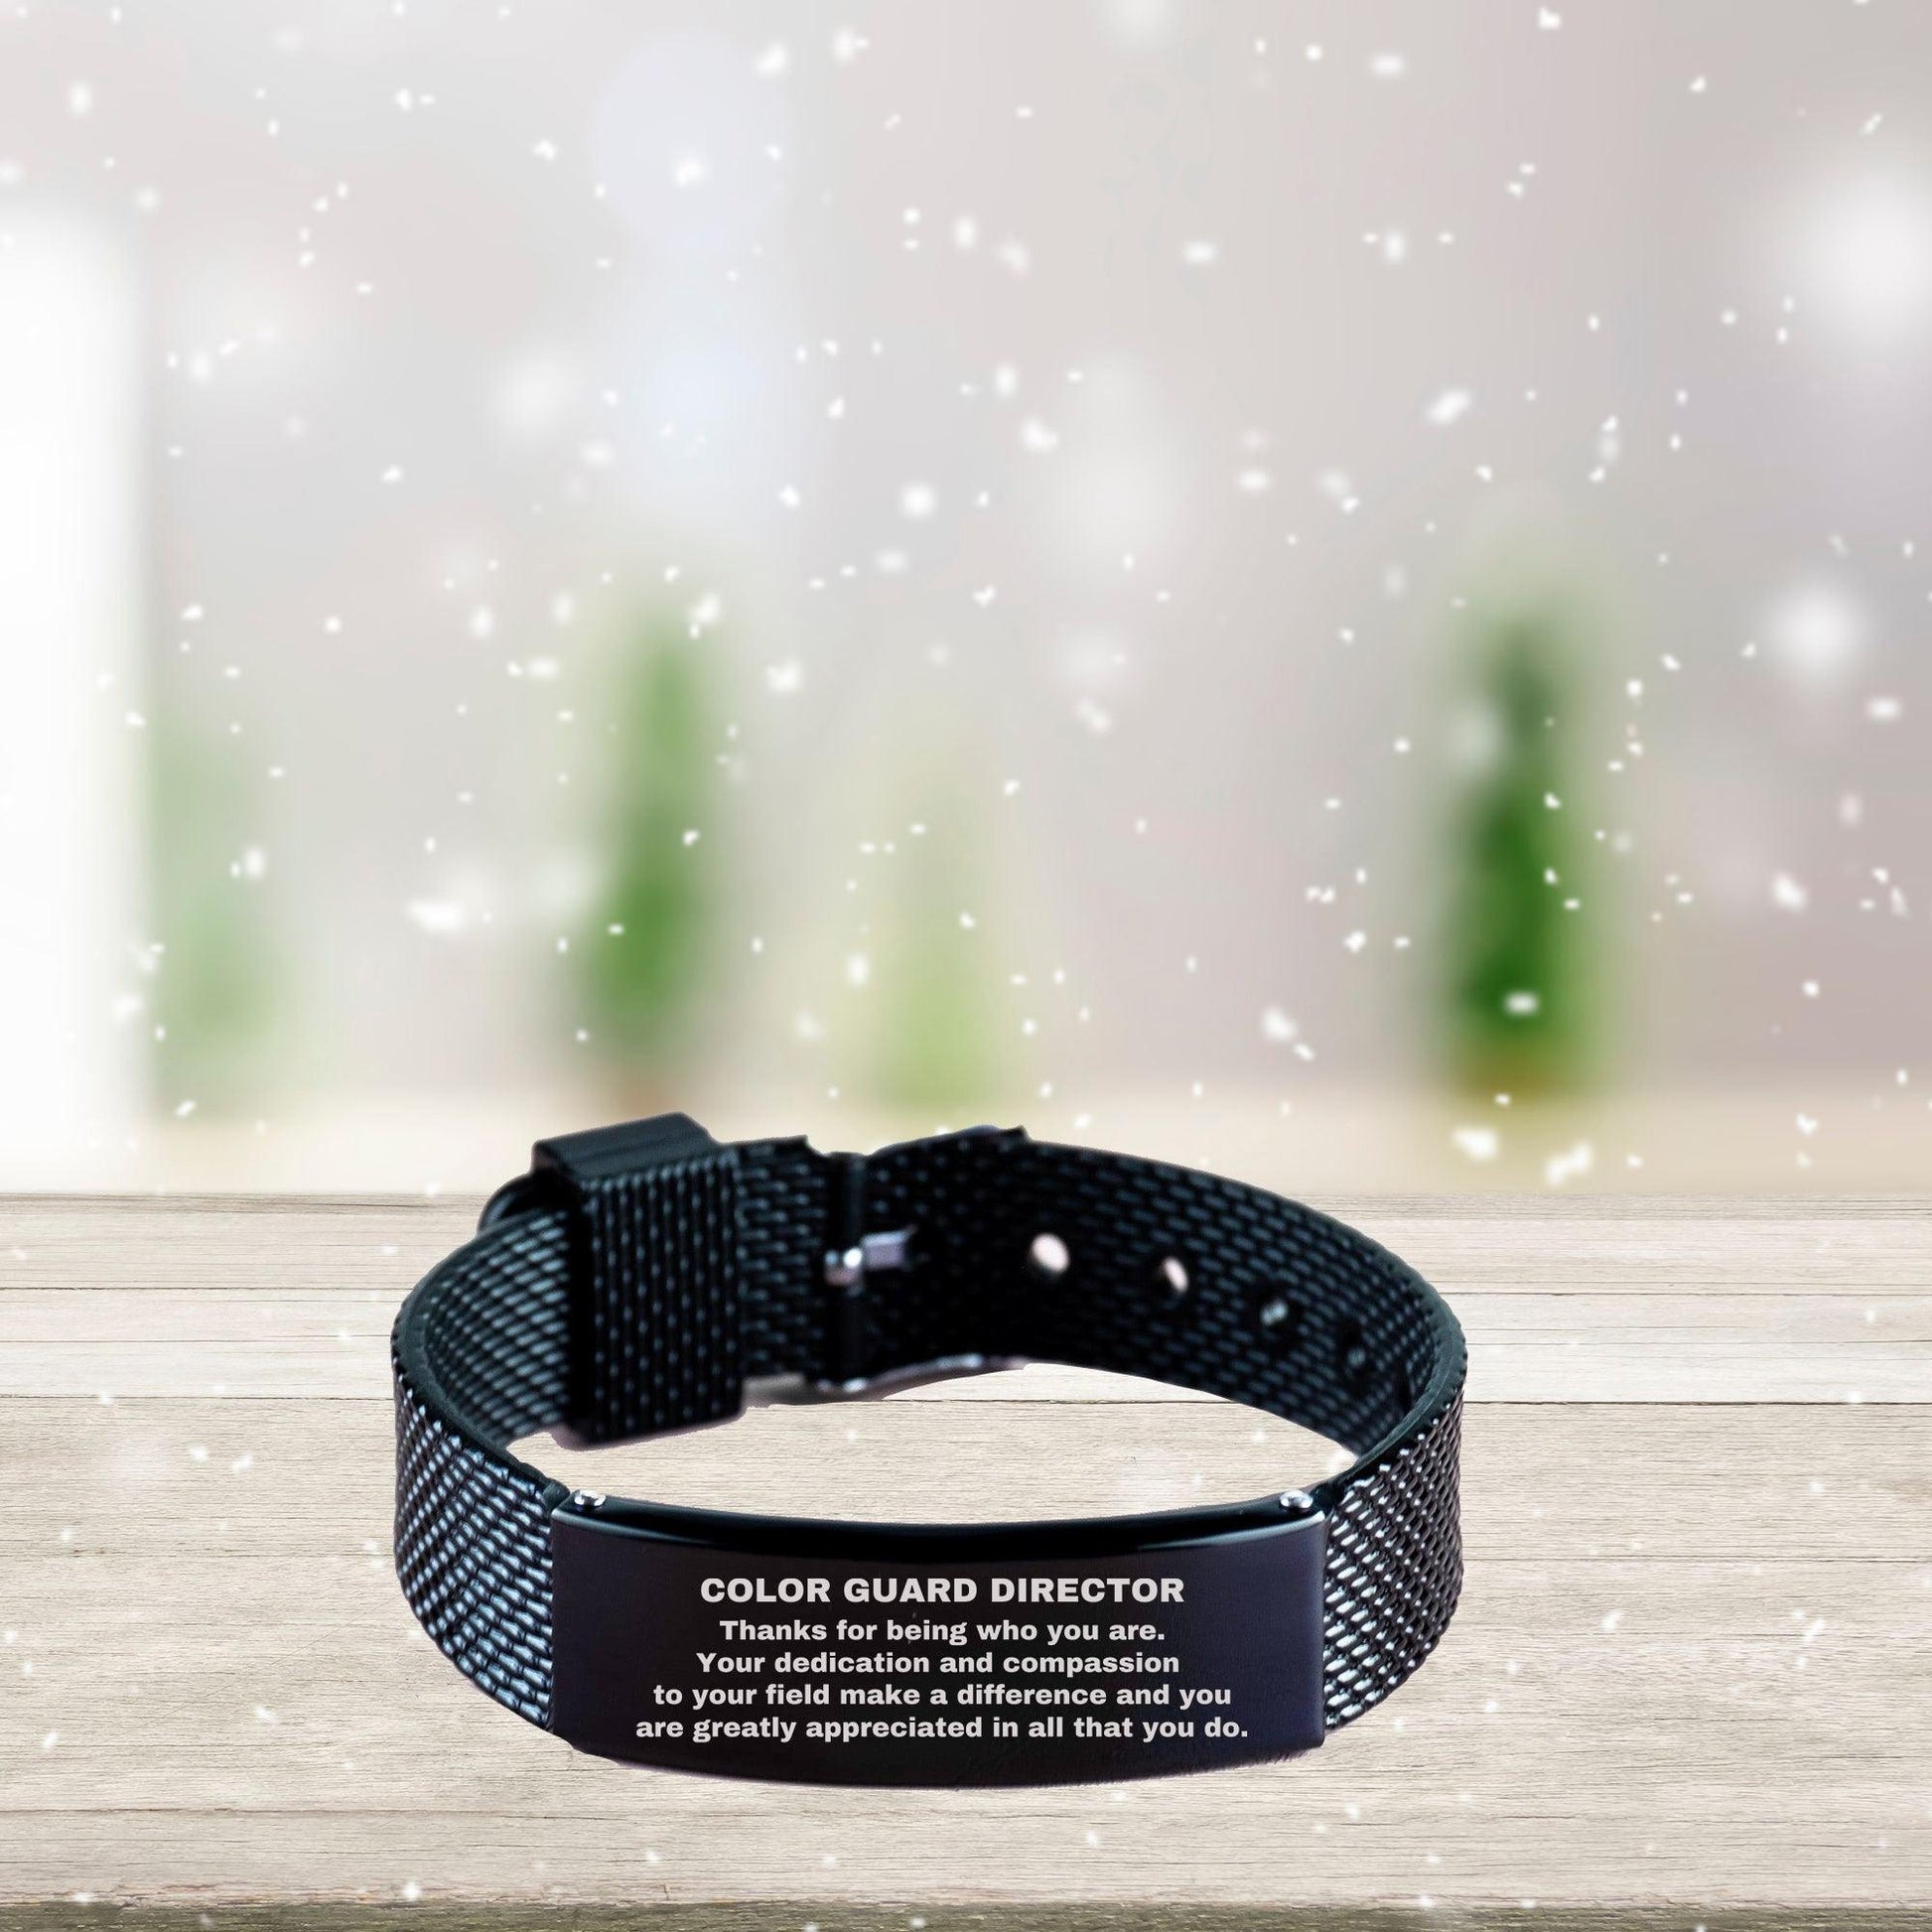 Color Guard Director Black Shark Mesh Stainless Steel Engraved Bracelet - Thanks for being who you are - Birthday Christmas Jewelry Gifts Coworkers Colleague Boss - Mallard Moon Gift Shop